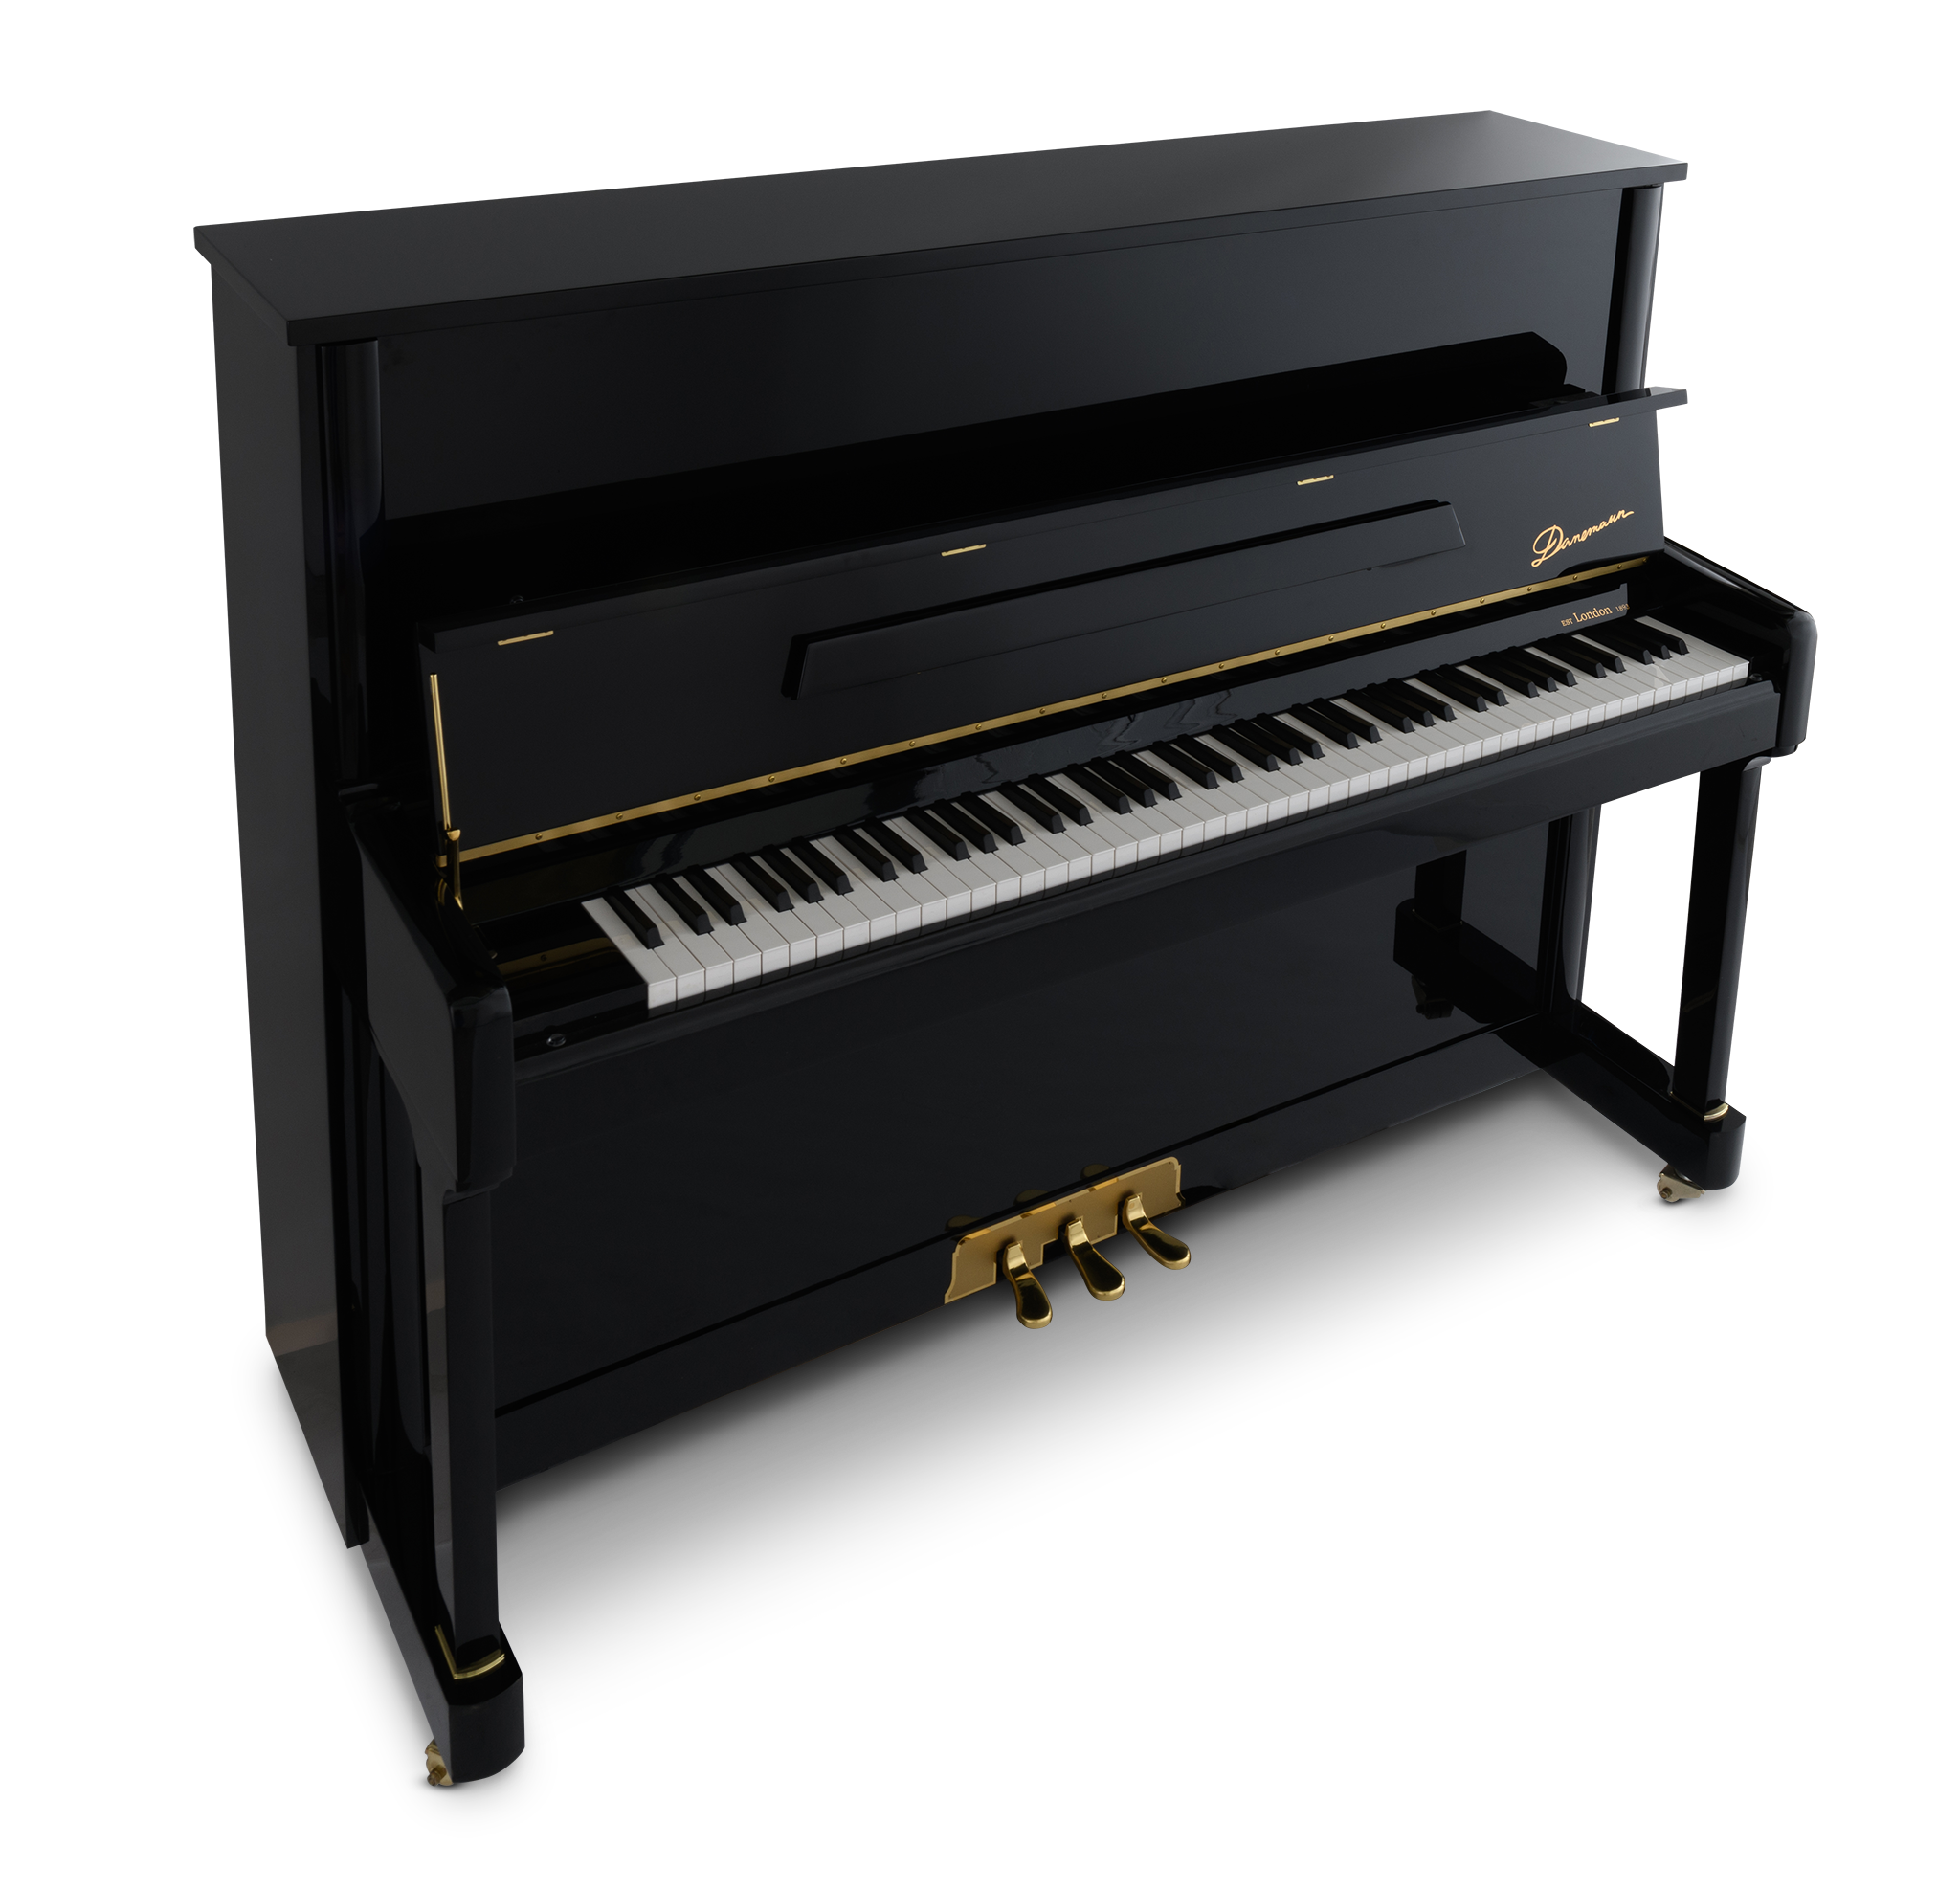 intermitente Limo Odiseo Piano Lobby - Yamaha pianos for sale at affordable prices